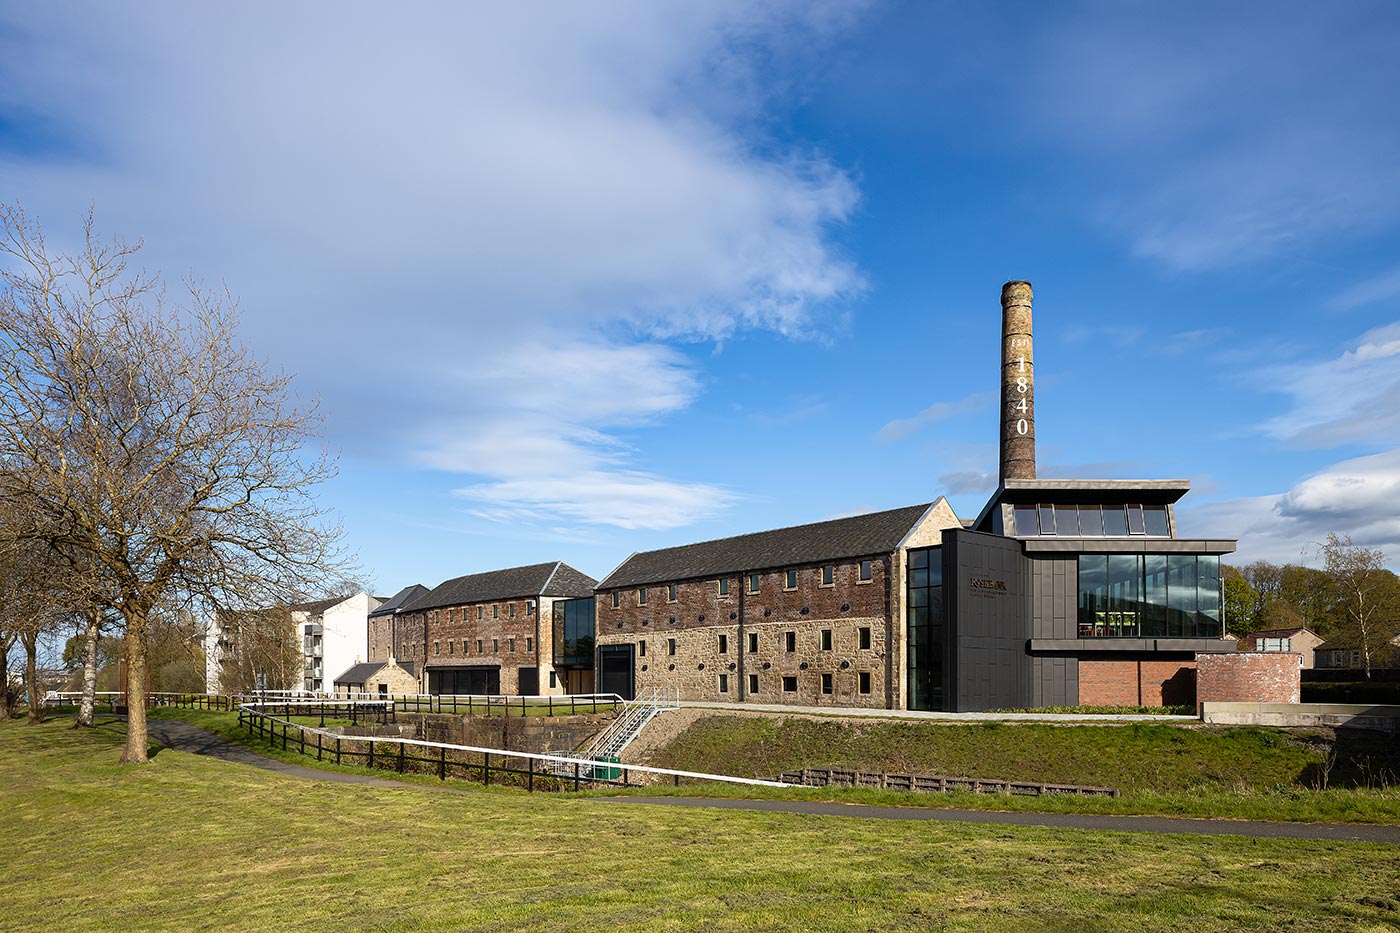 Rosebank Distillery pictured alongside the canal with grass in the foreground